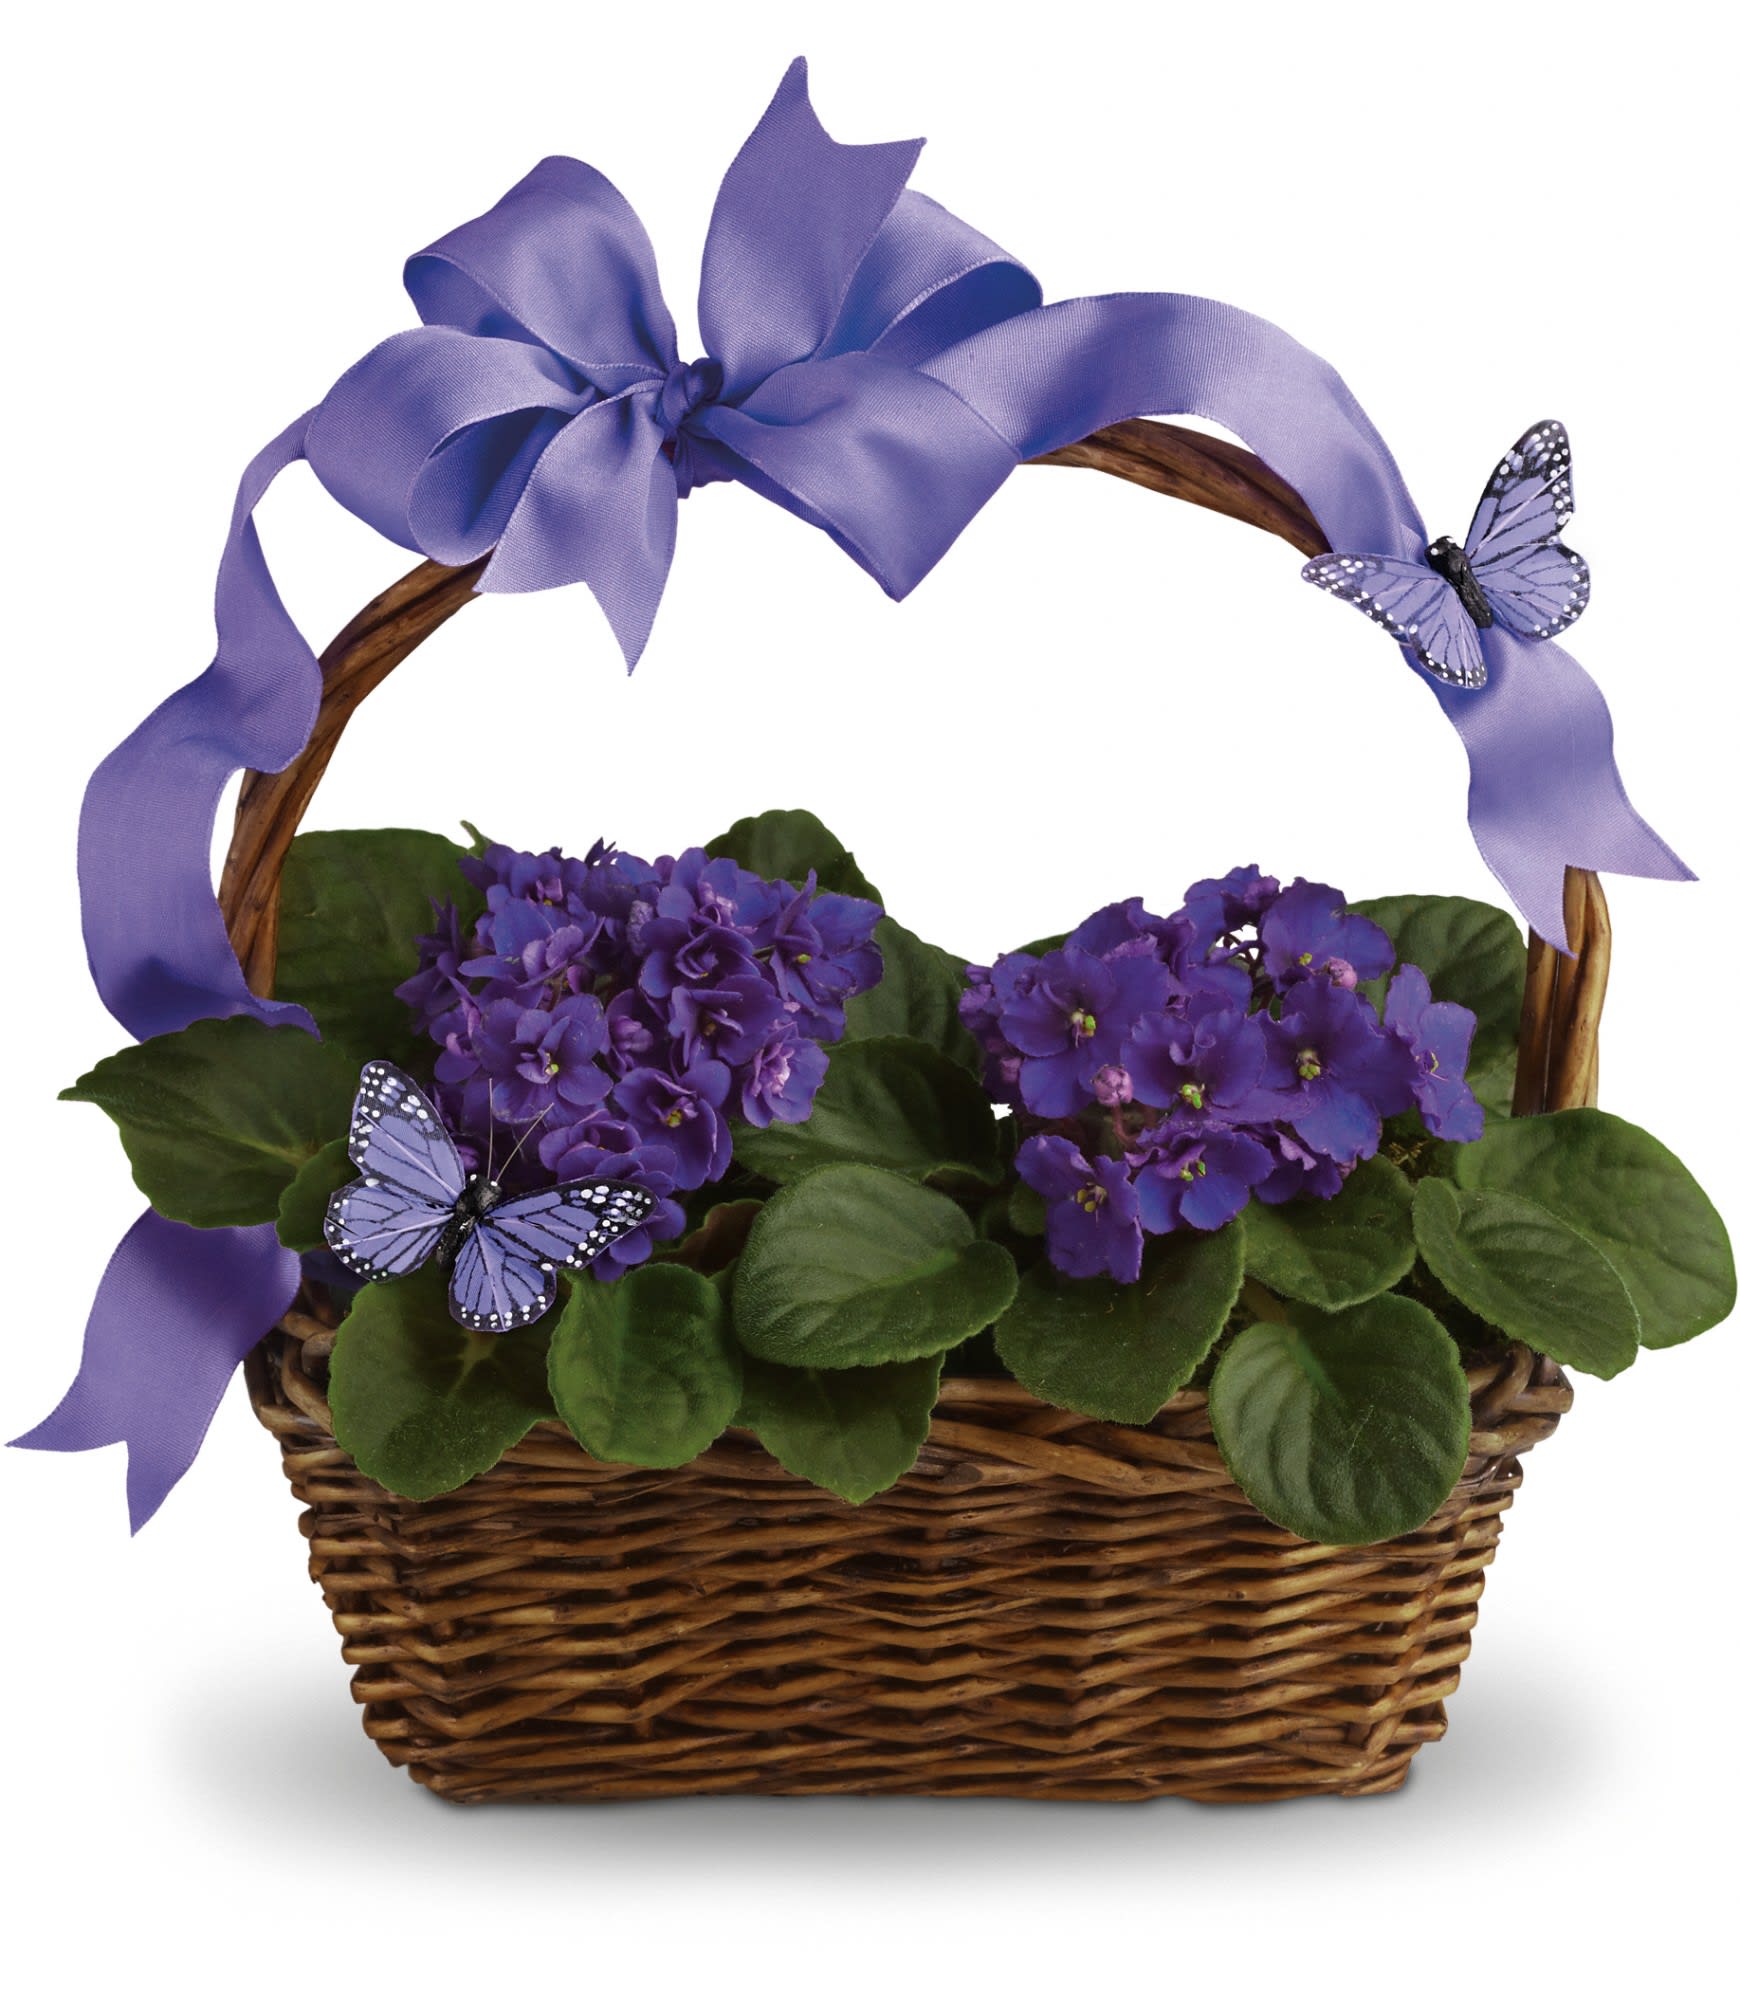 Violets and Butterflies in a basket (basket design will vary)